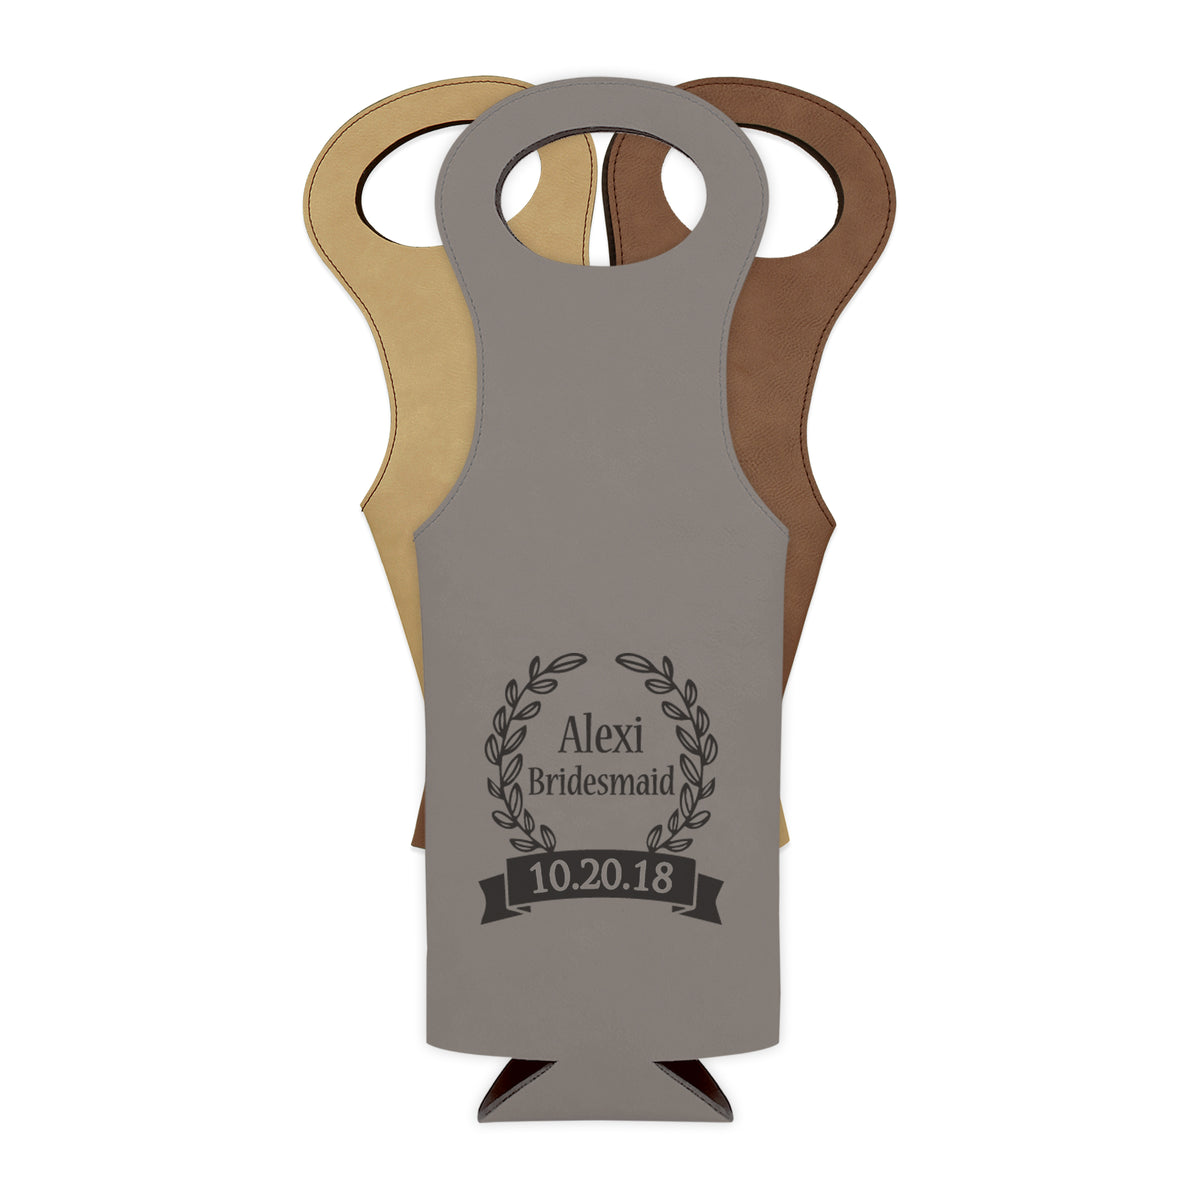 Bridesmaids wine tote bag, Wine carrier bag engraved, Personalized wine gift /Laser engraved